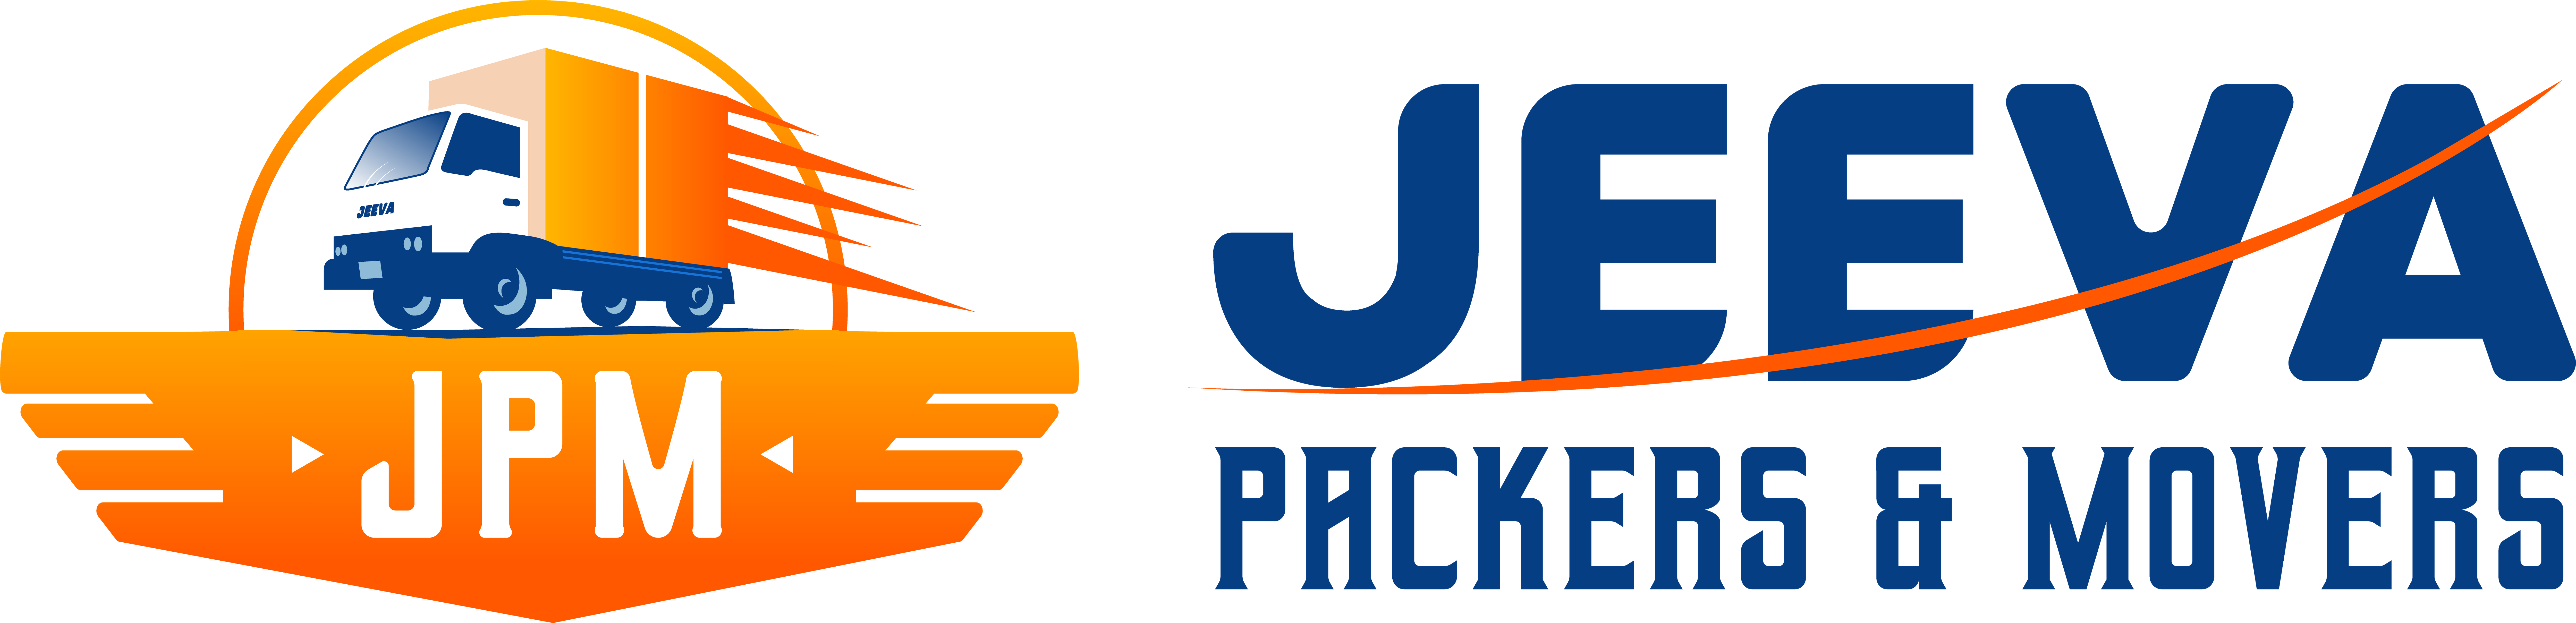 Jeeva Packers And Movers